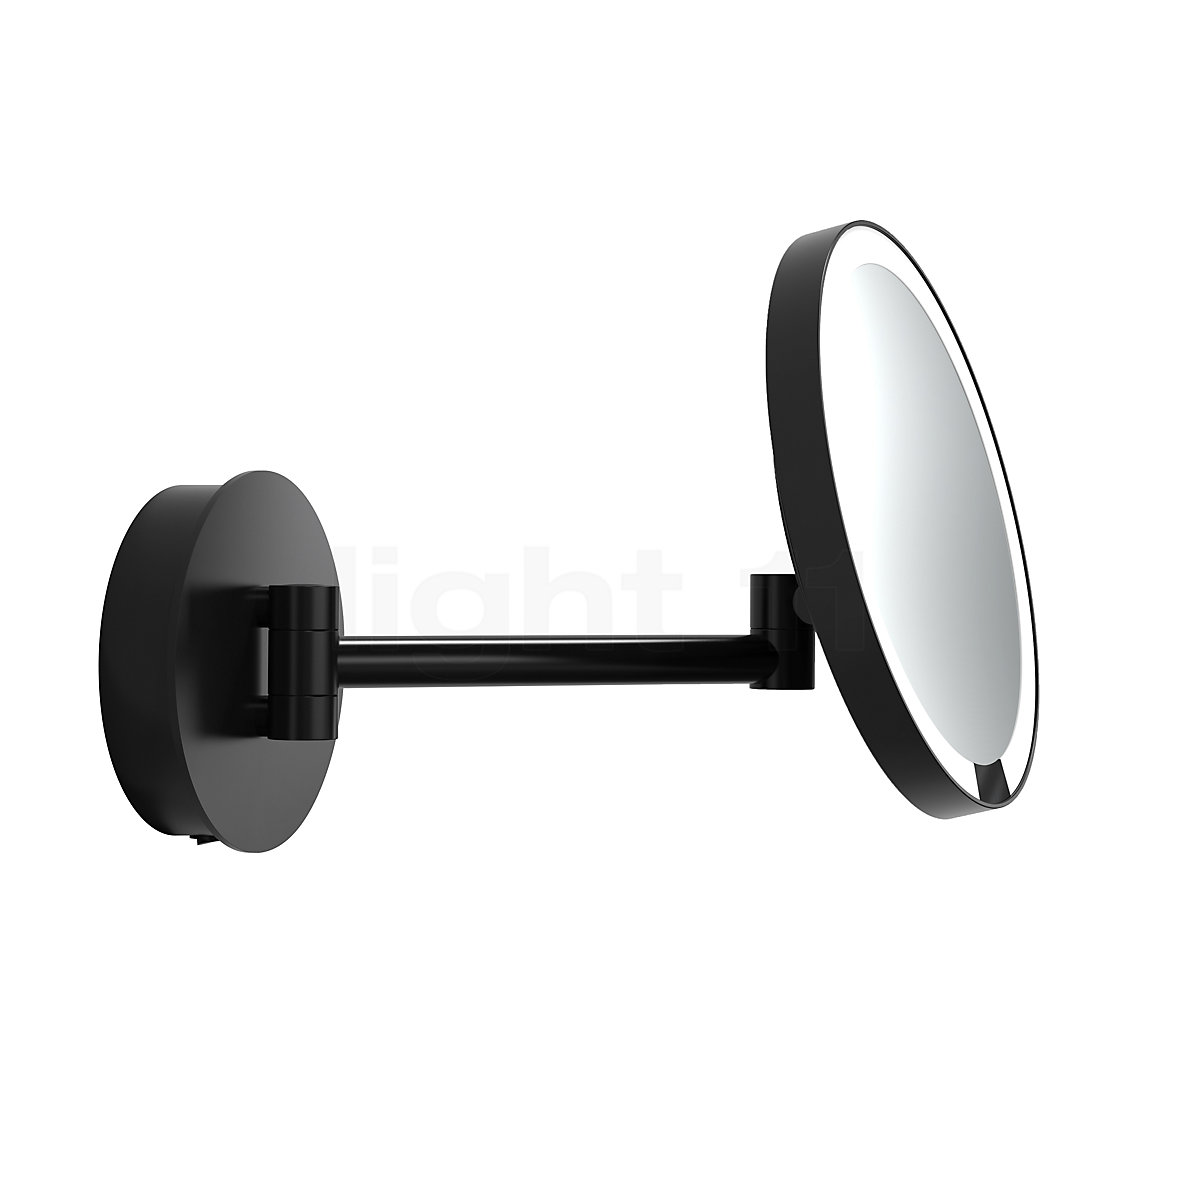 Decor Walther Just Look Wall, Wall Mount Makeup Mirror Black